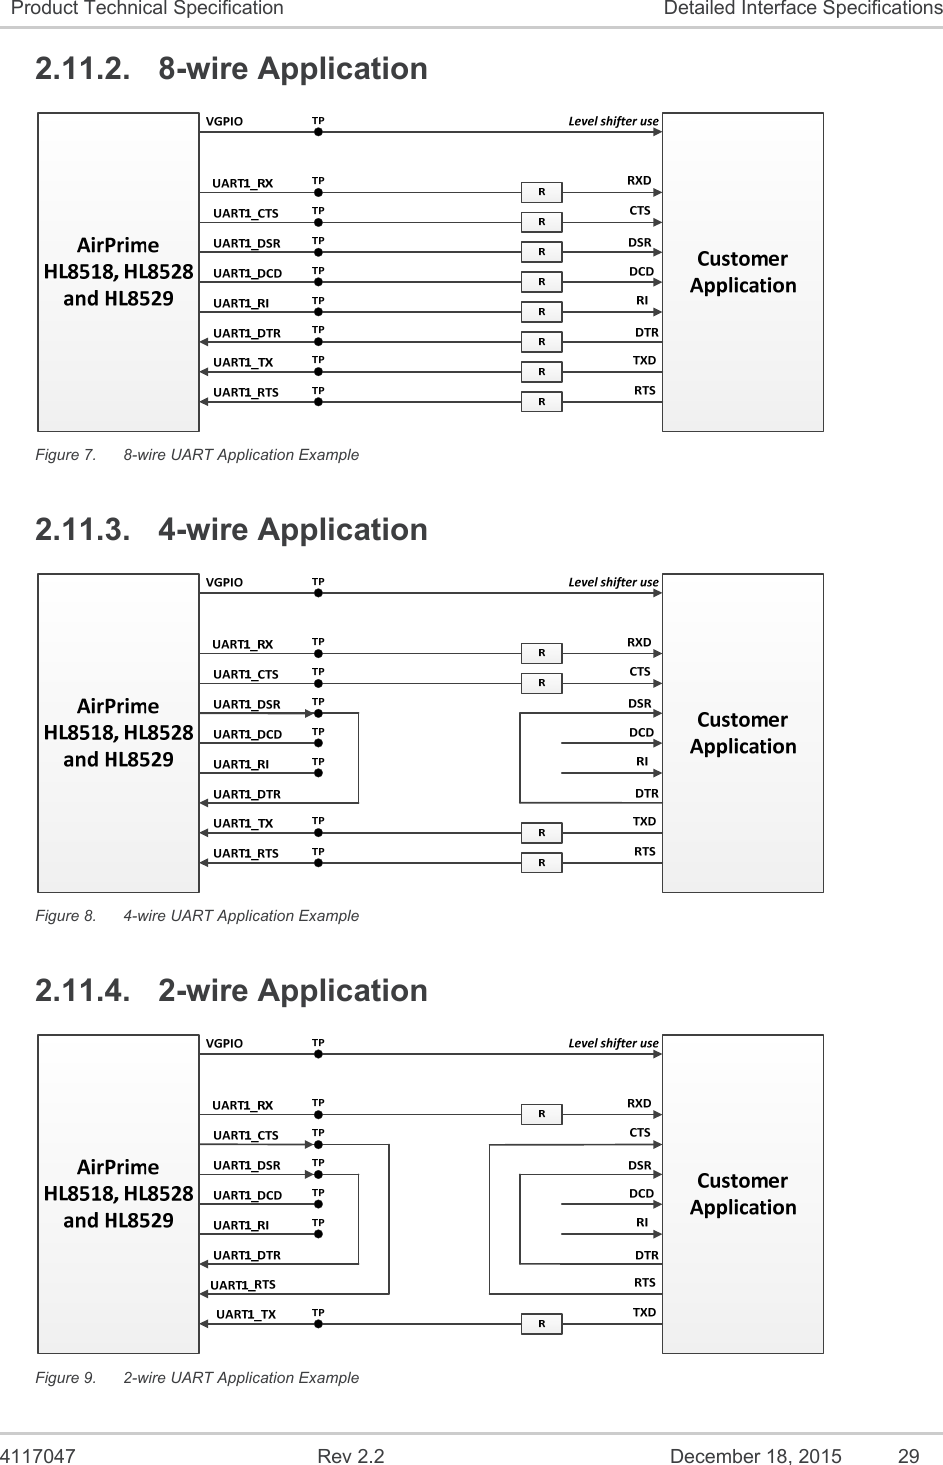  4117047  Rev 2.2  December 18, 2015  29 Product Technical Specification  Detailed Interface Specifications 2.11.2.  8-wire Application  Figure 7.  8-wire UART Application Example 2.11.3.  4-wire Application  Figure 8.  4-wire UART Application Example 2.11.4.  2-wire Application  Figure 9.  2-wire UART Application Example 